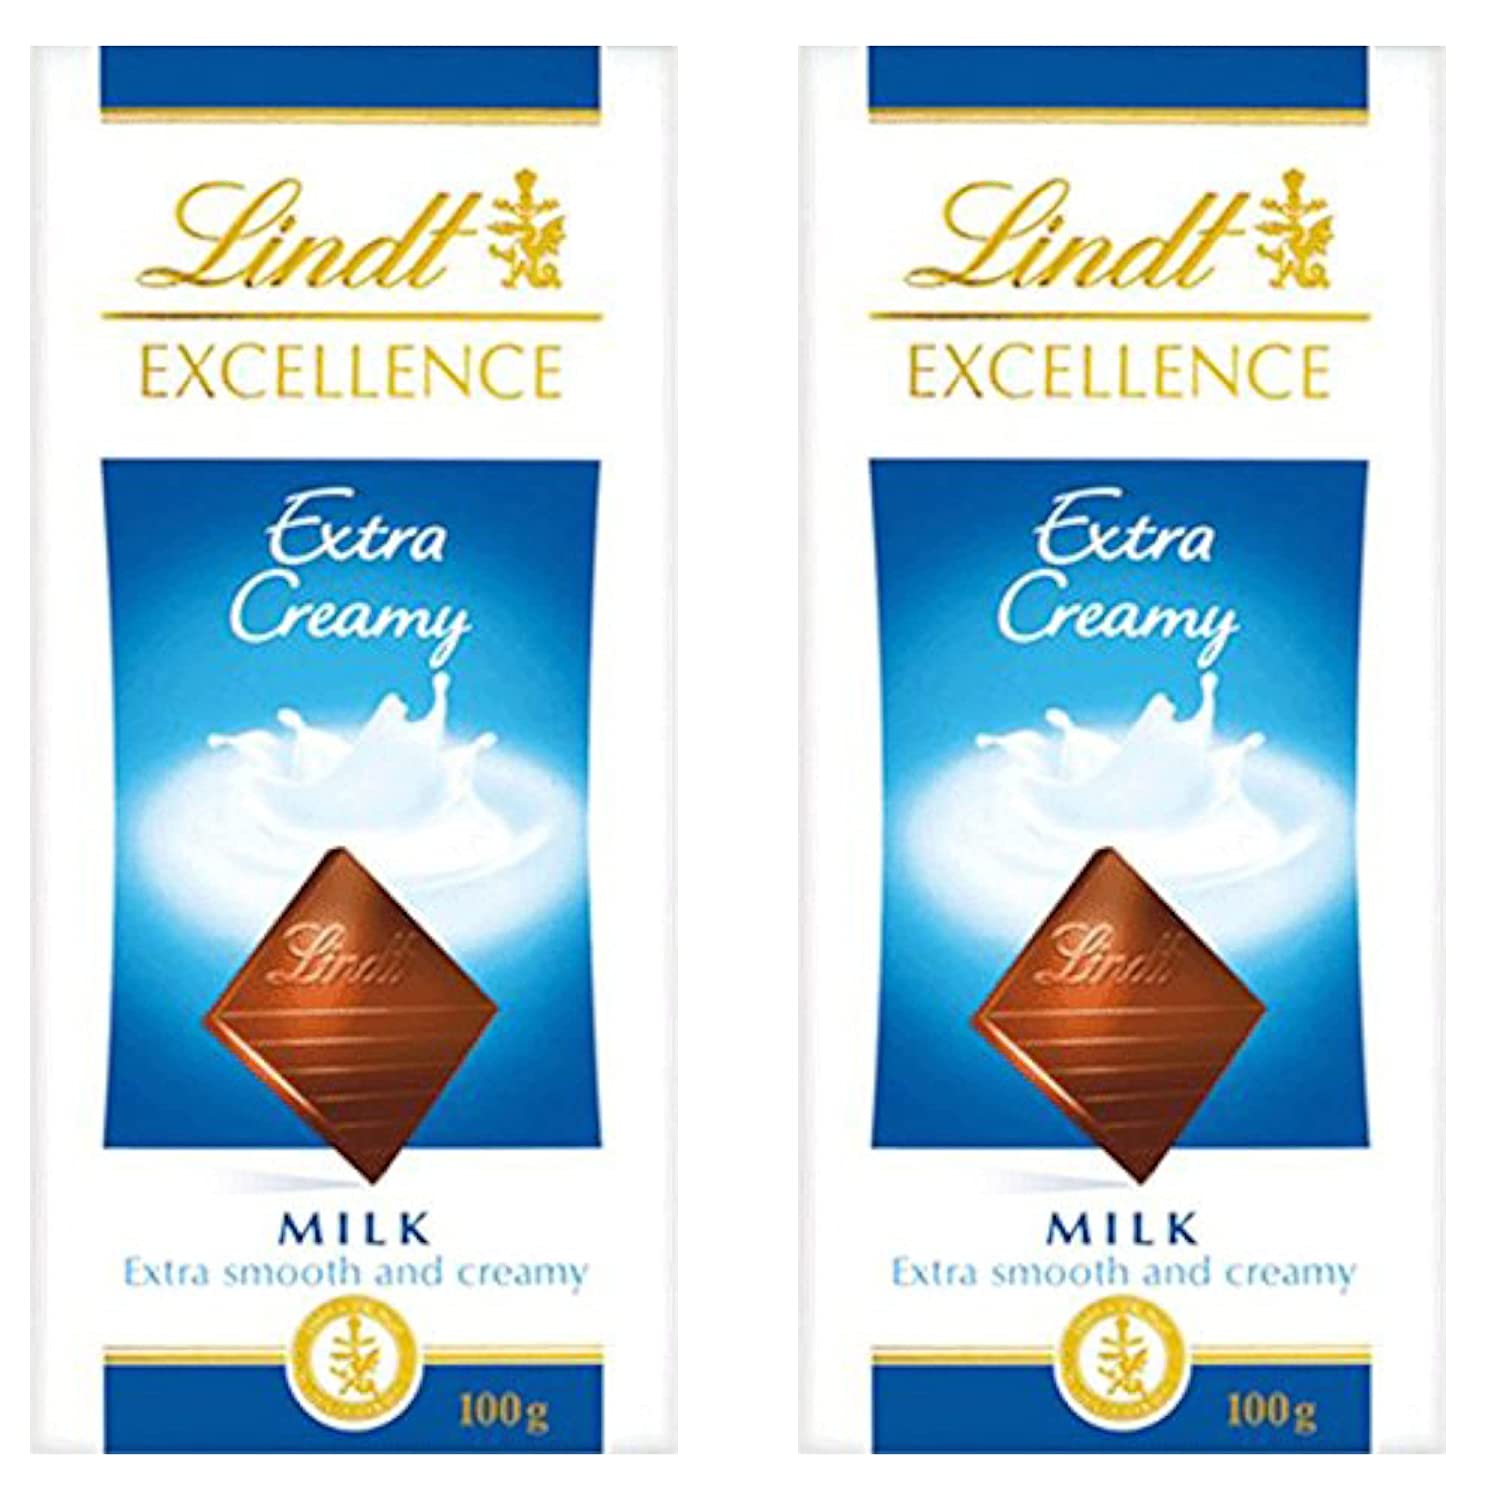 Lindt Excellence Extra Creamy Milk Image